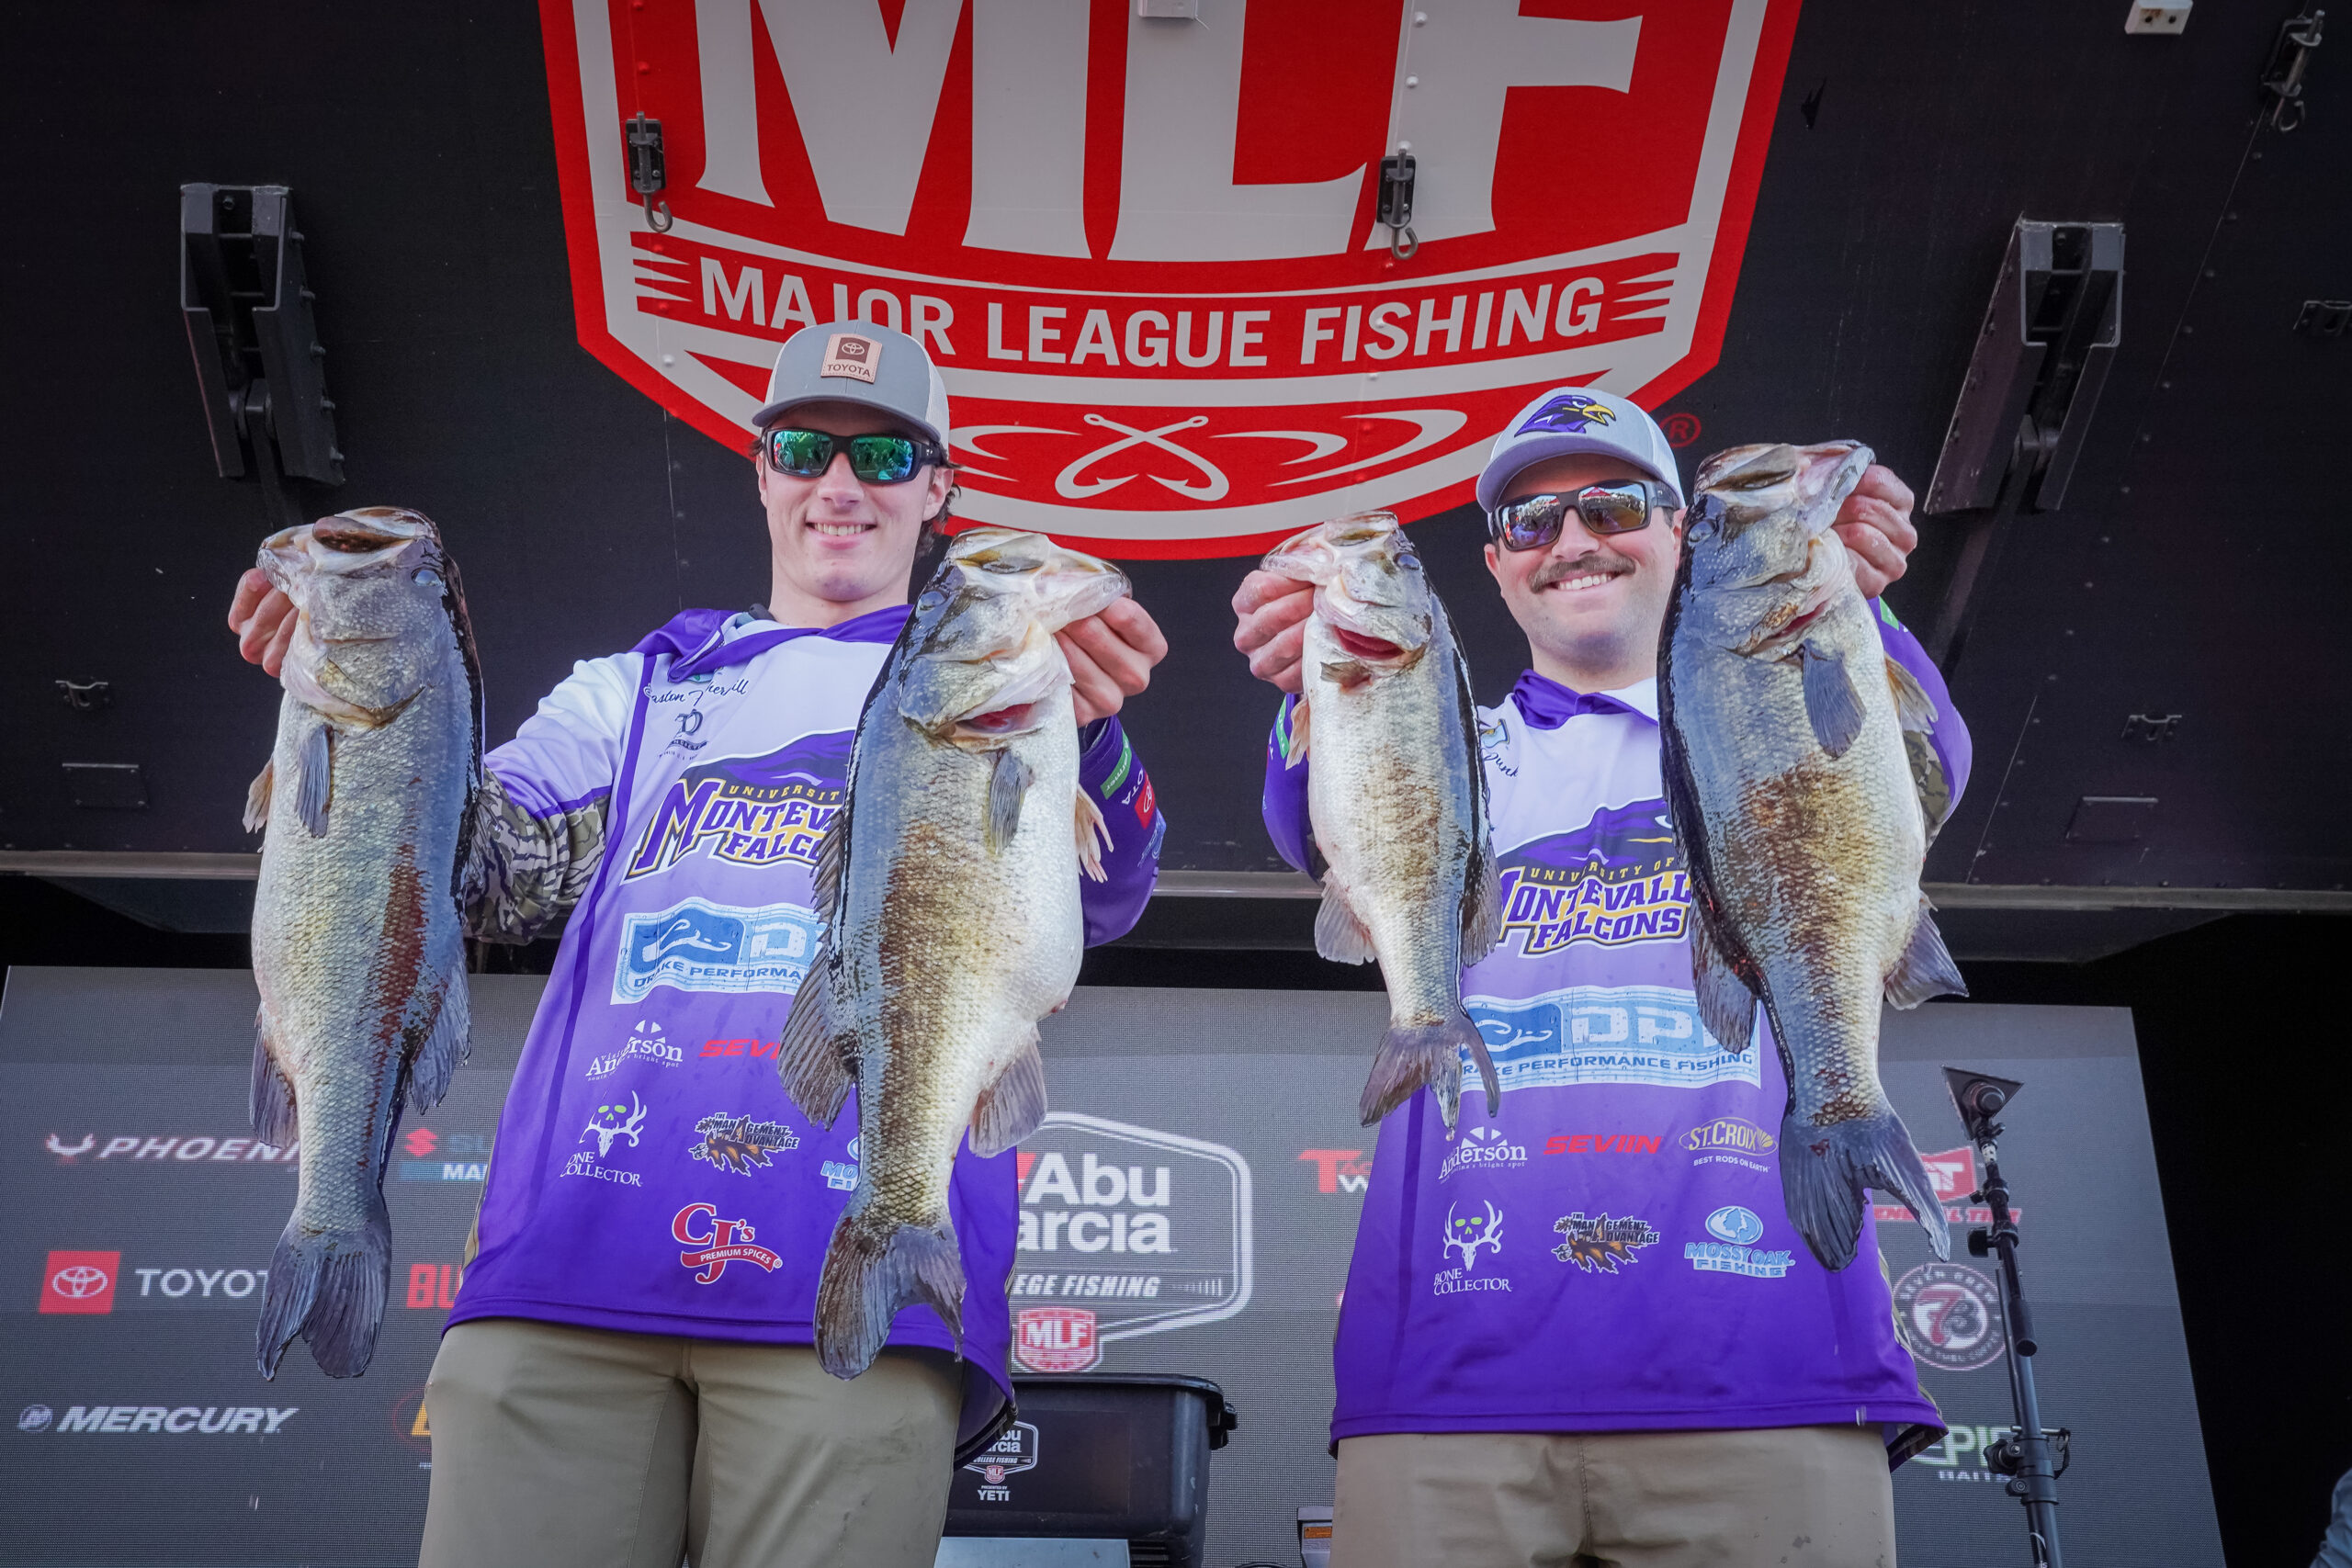 GALLERY: Championship Thursday is underway in Florida - Major League Fishing